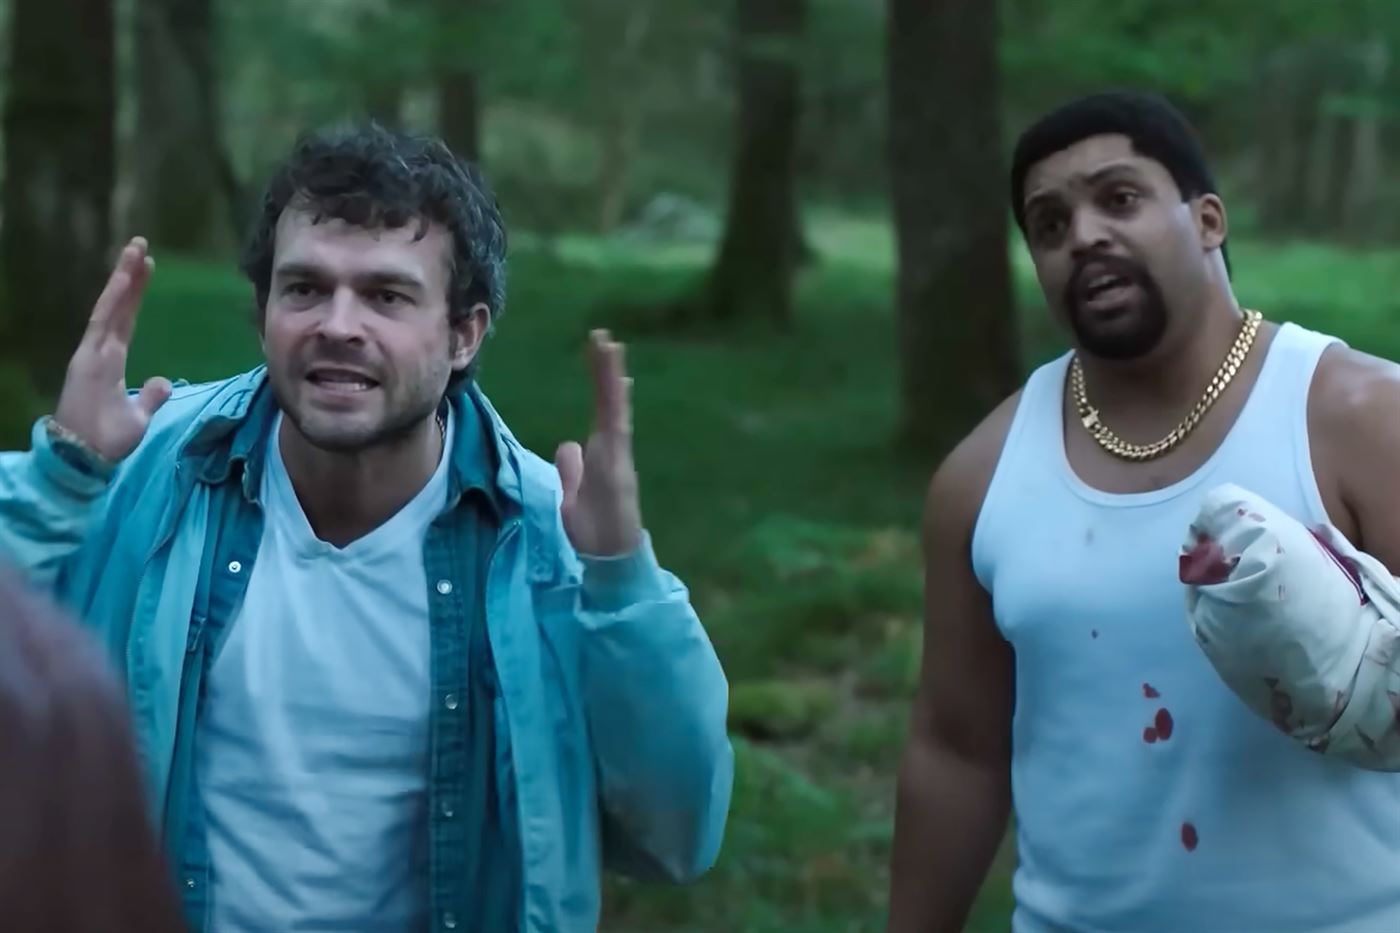 Eddie (played by Alden Ehrenreich, left) and Daveed (played by O'Shea Jackson, Jr., right) revel in the absurdity of their foe.